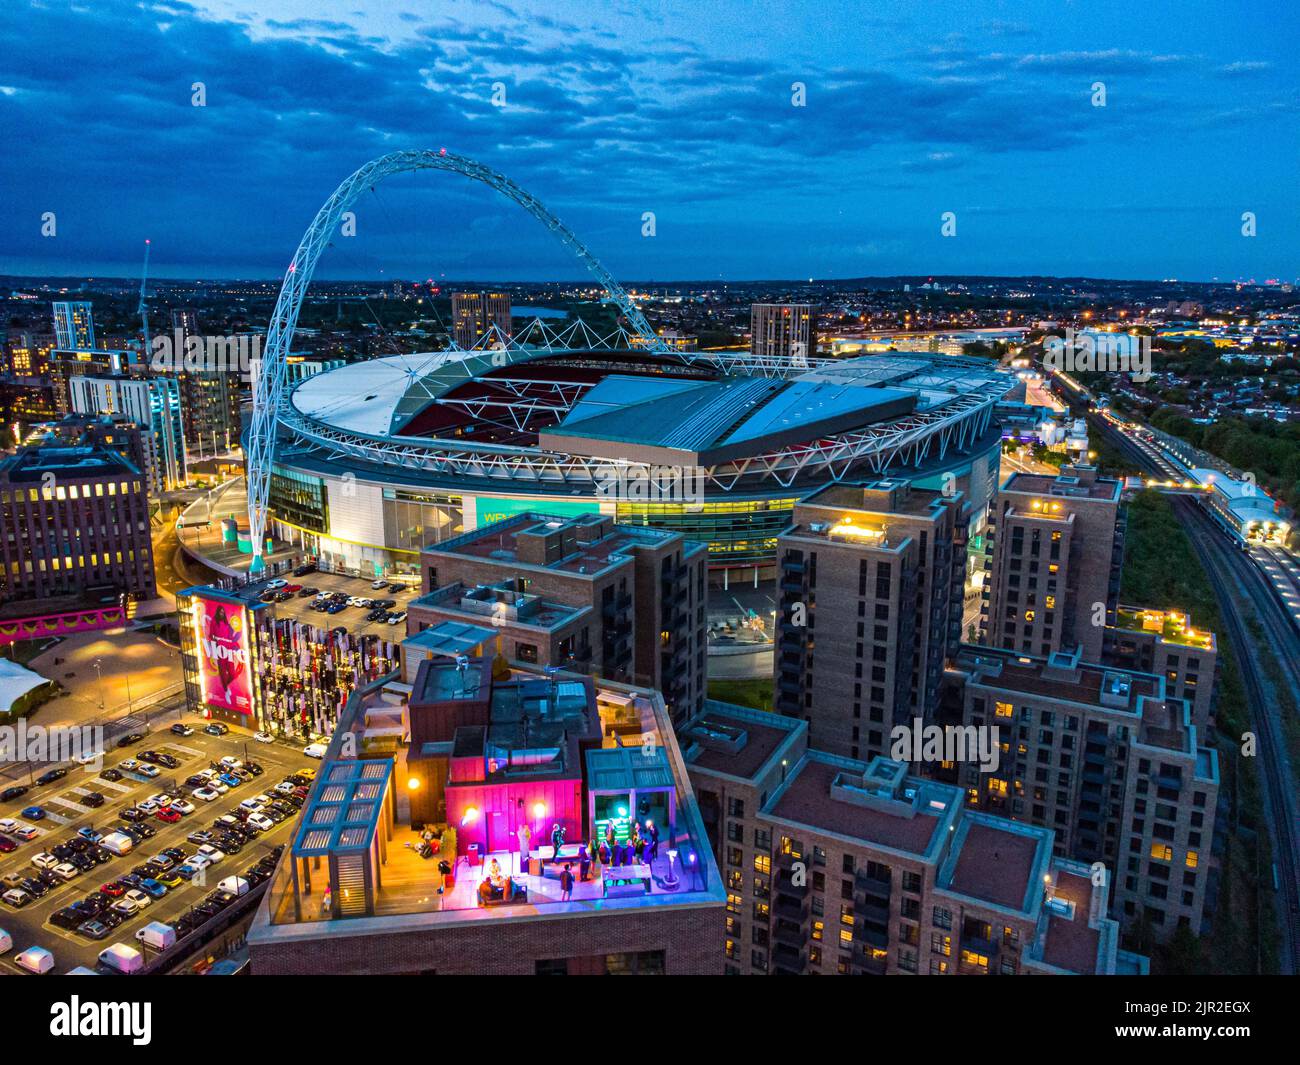 An aerial view of rooftop party in London near Wembley Stadium Stock Photo